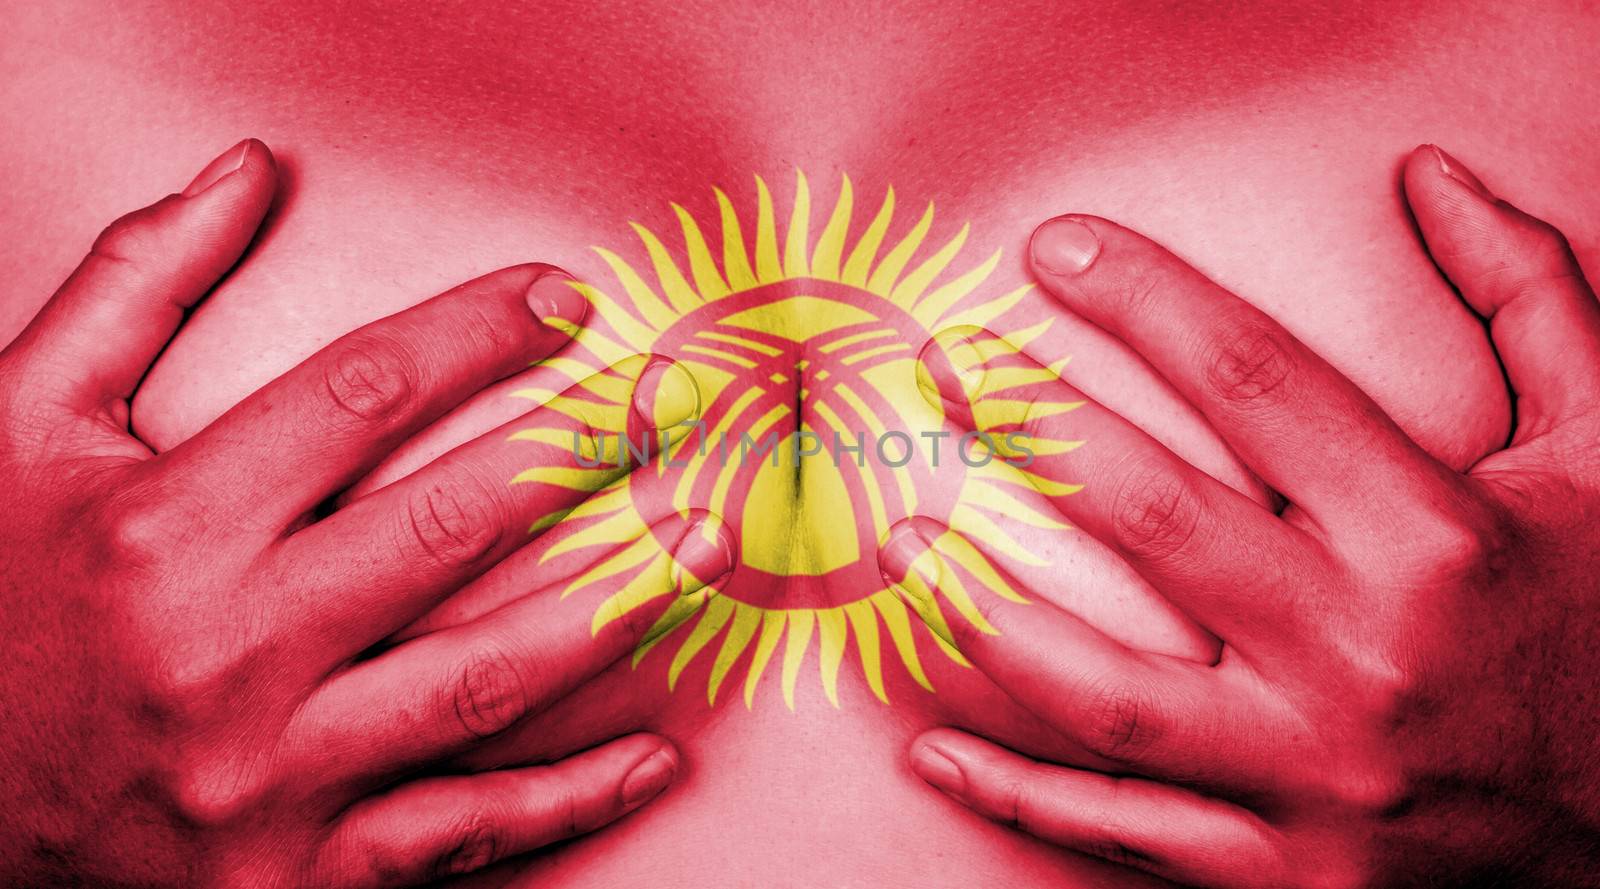 Upper part of female body, hands covering breasts, flag of Kyrgyzstan